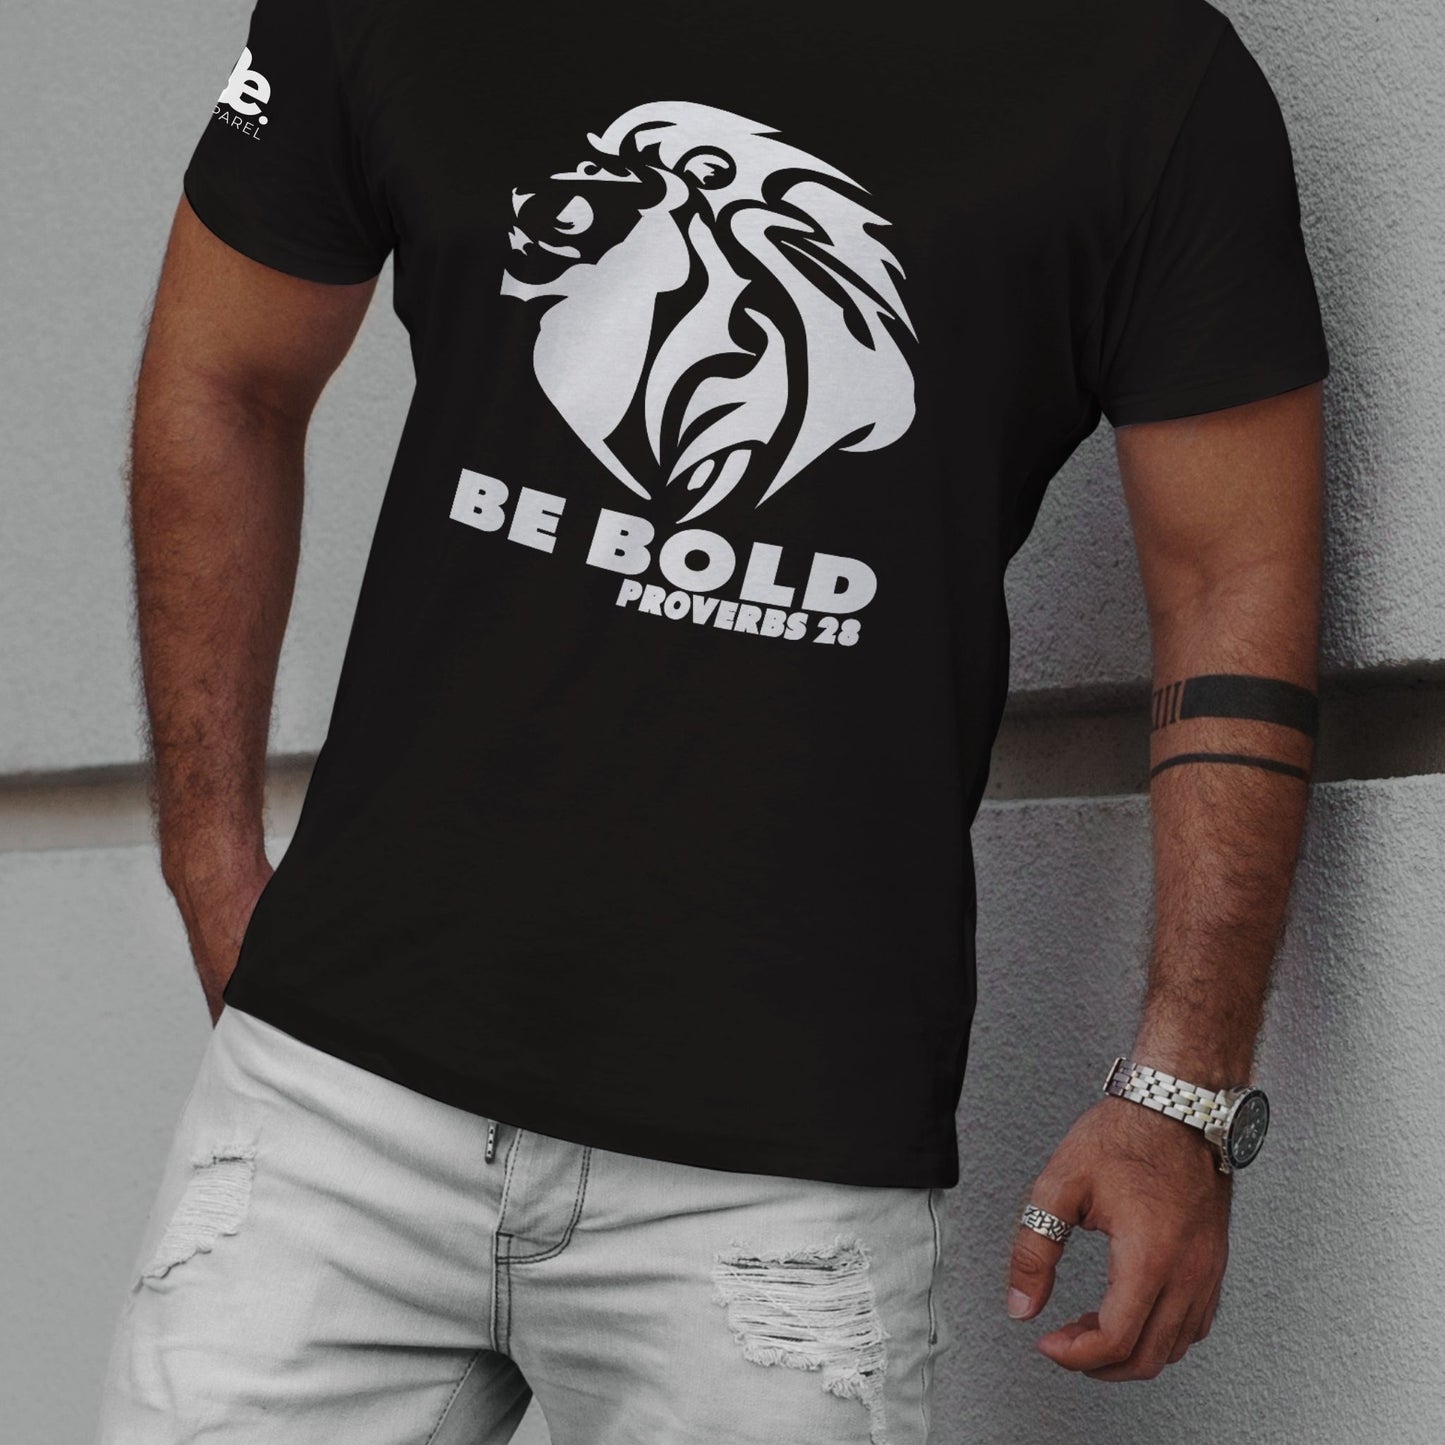 BE BOLD - Black Tee (Limited Edition)